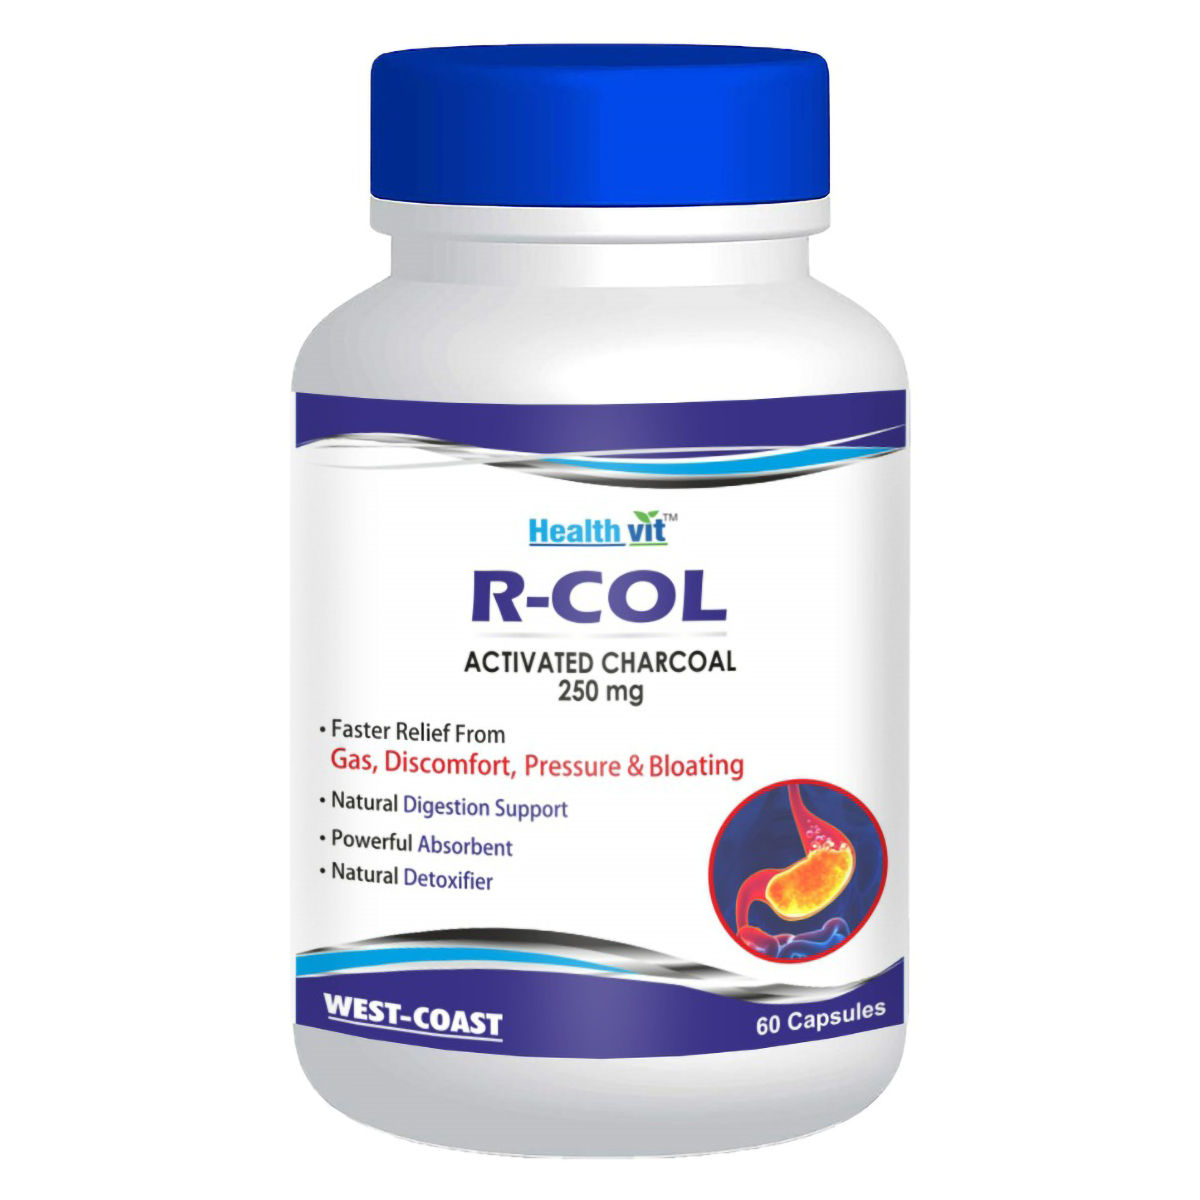 Buy Healthvit R-COL Activated Charcoal 250 mg, 60 Capsules Online